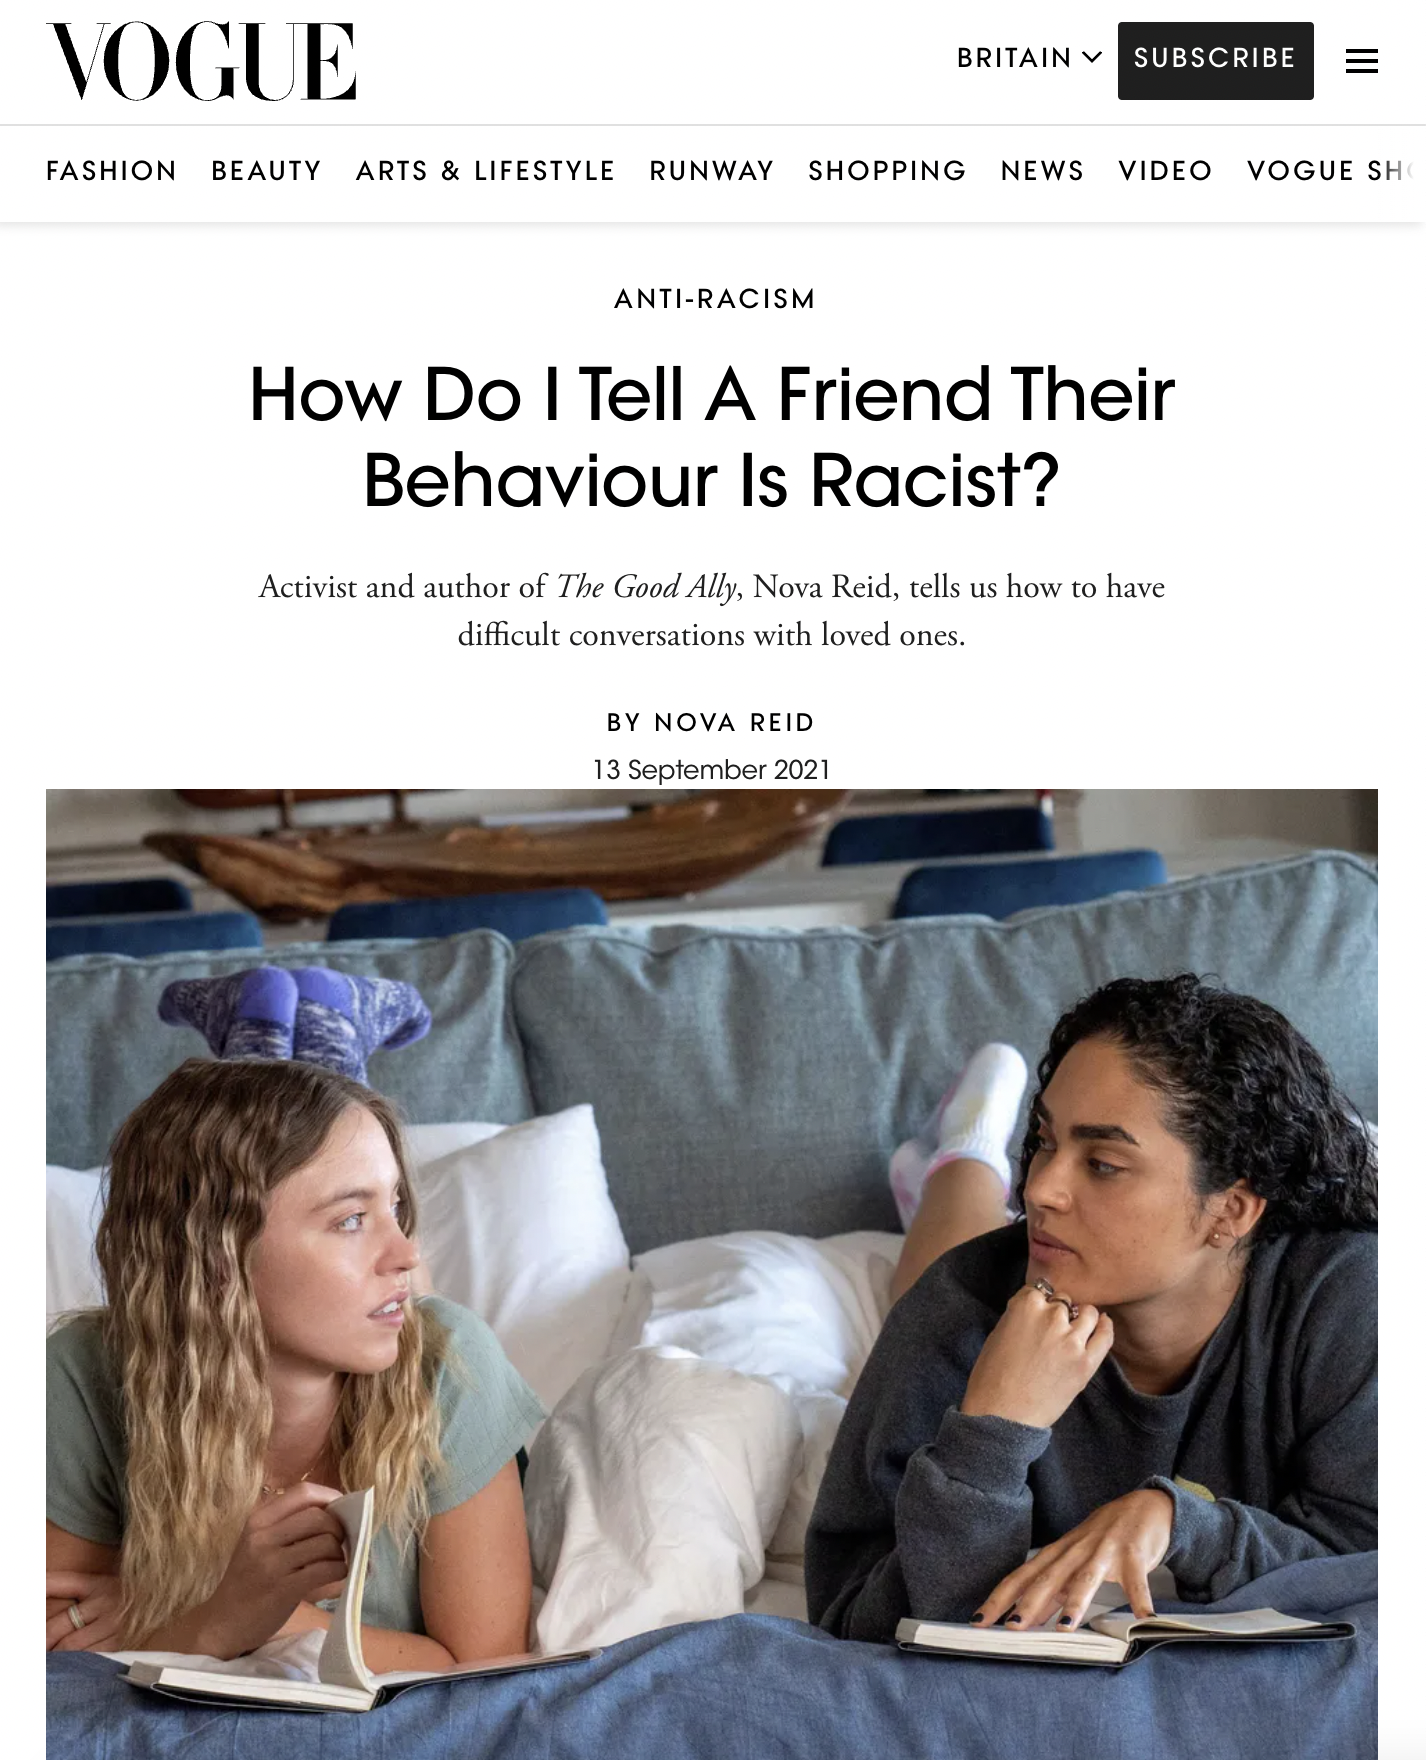 How to talk to friends about racism - Vogue 